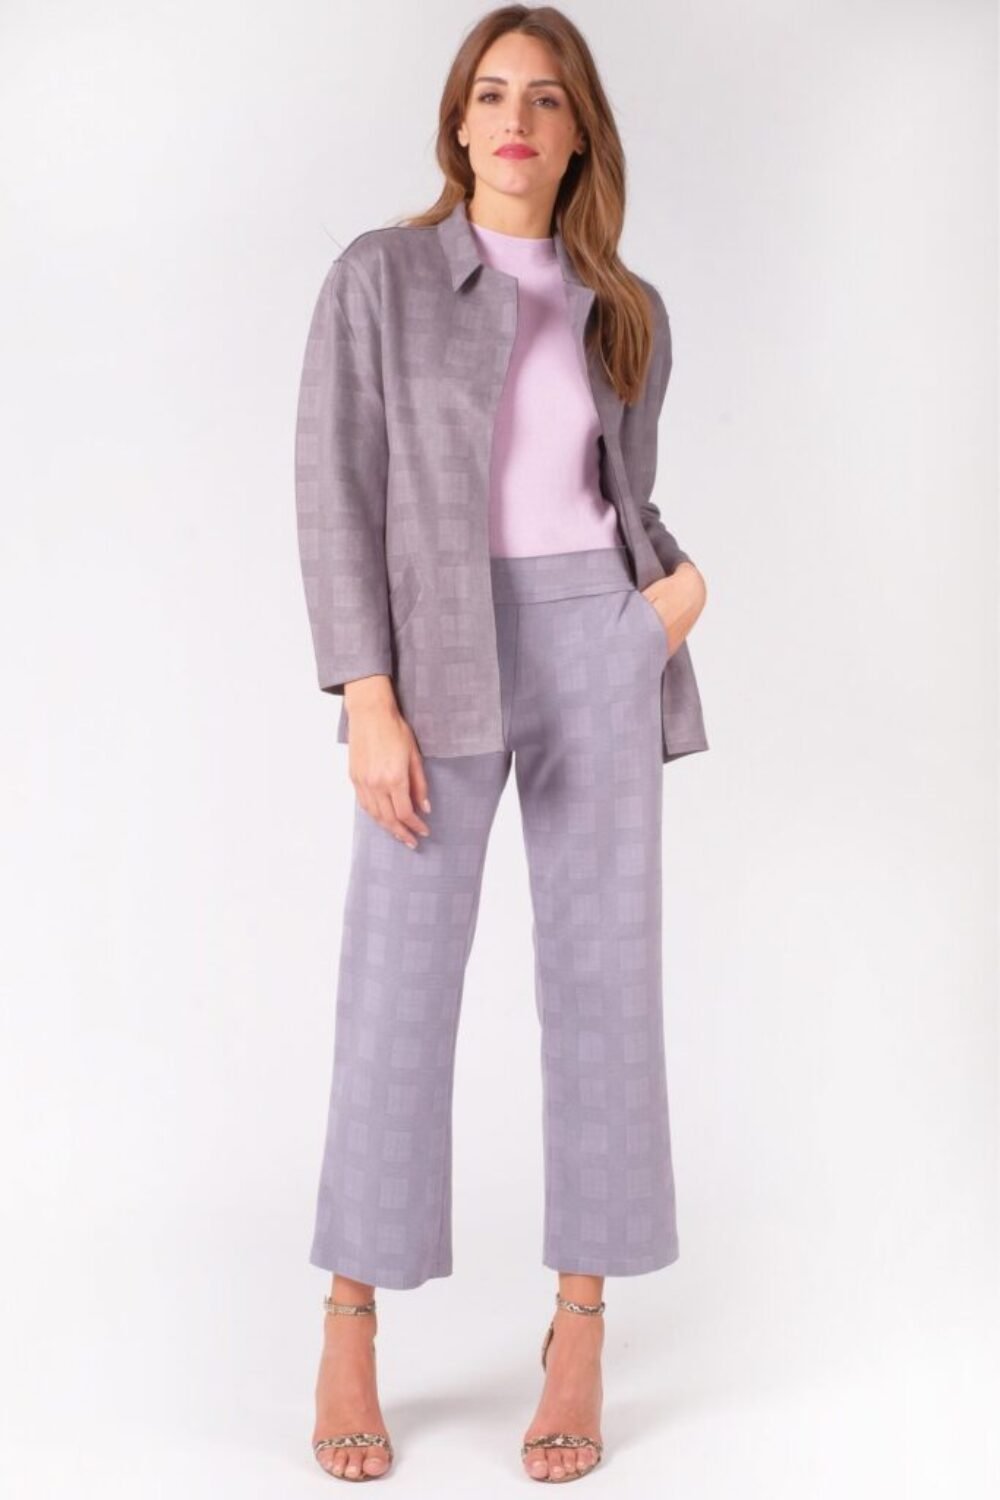 Shop Lux Grey Faux Suede Checked Jacket and women's luxury and designer clothes at www.lux-apparel.co.uk